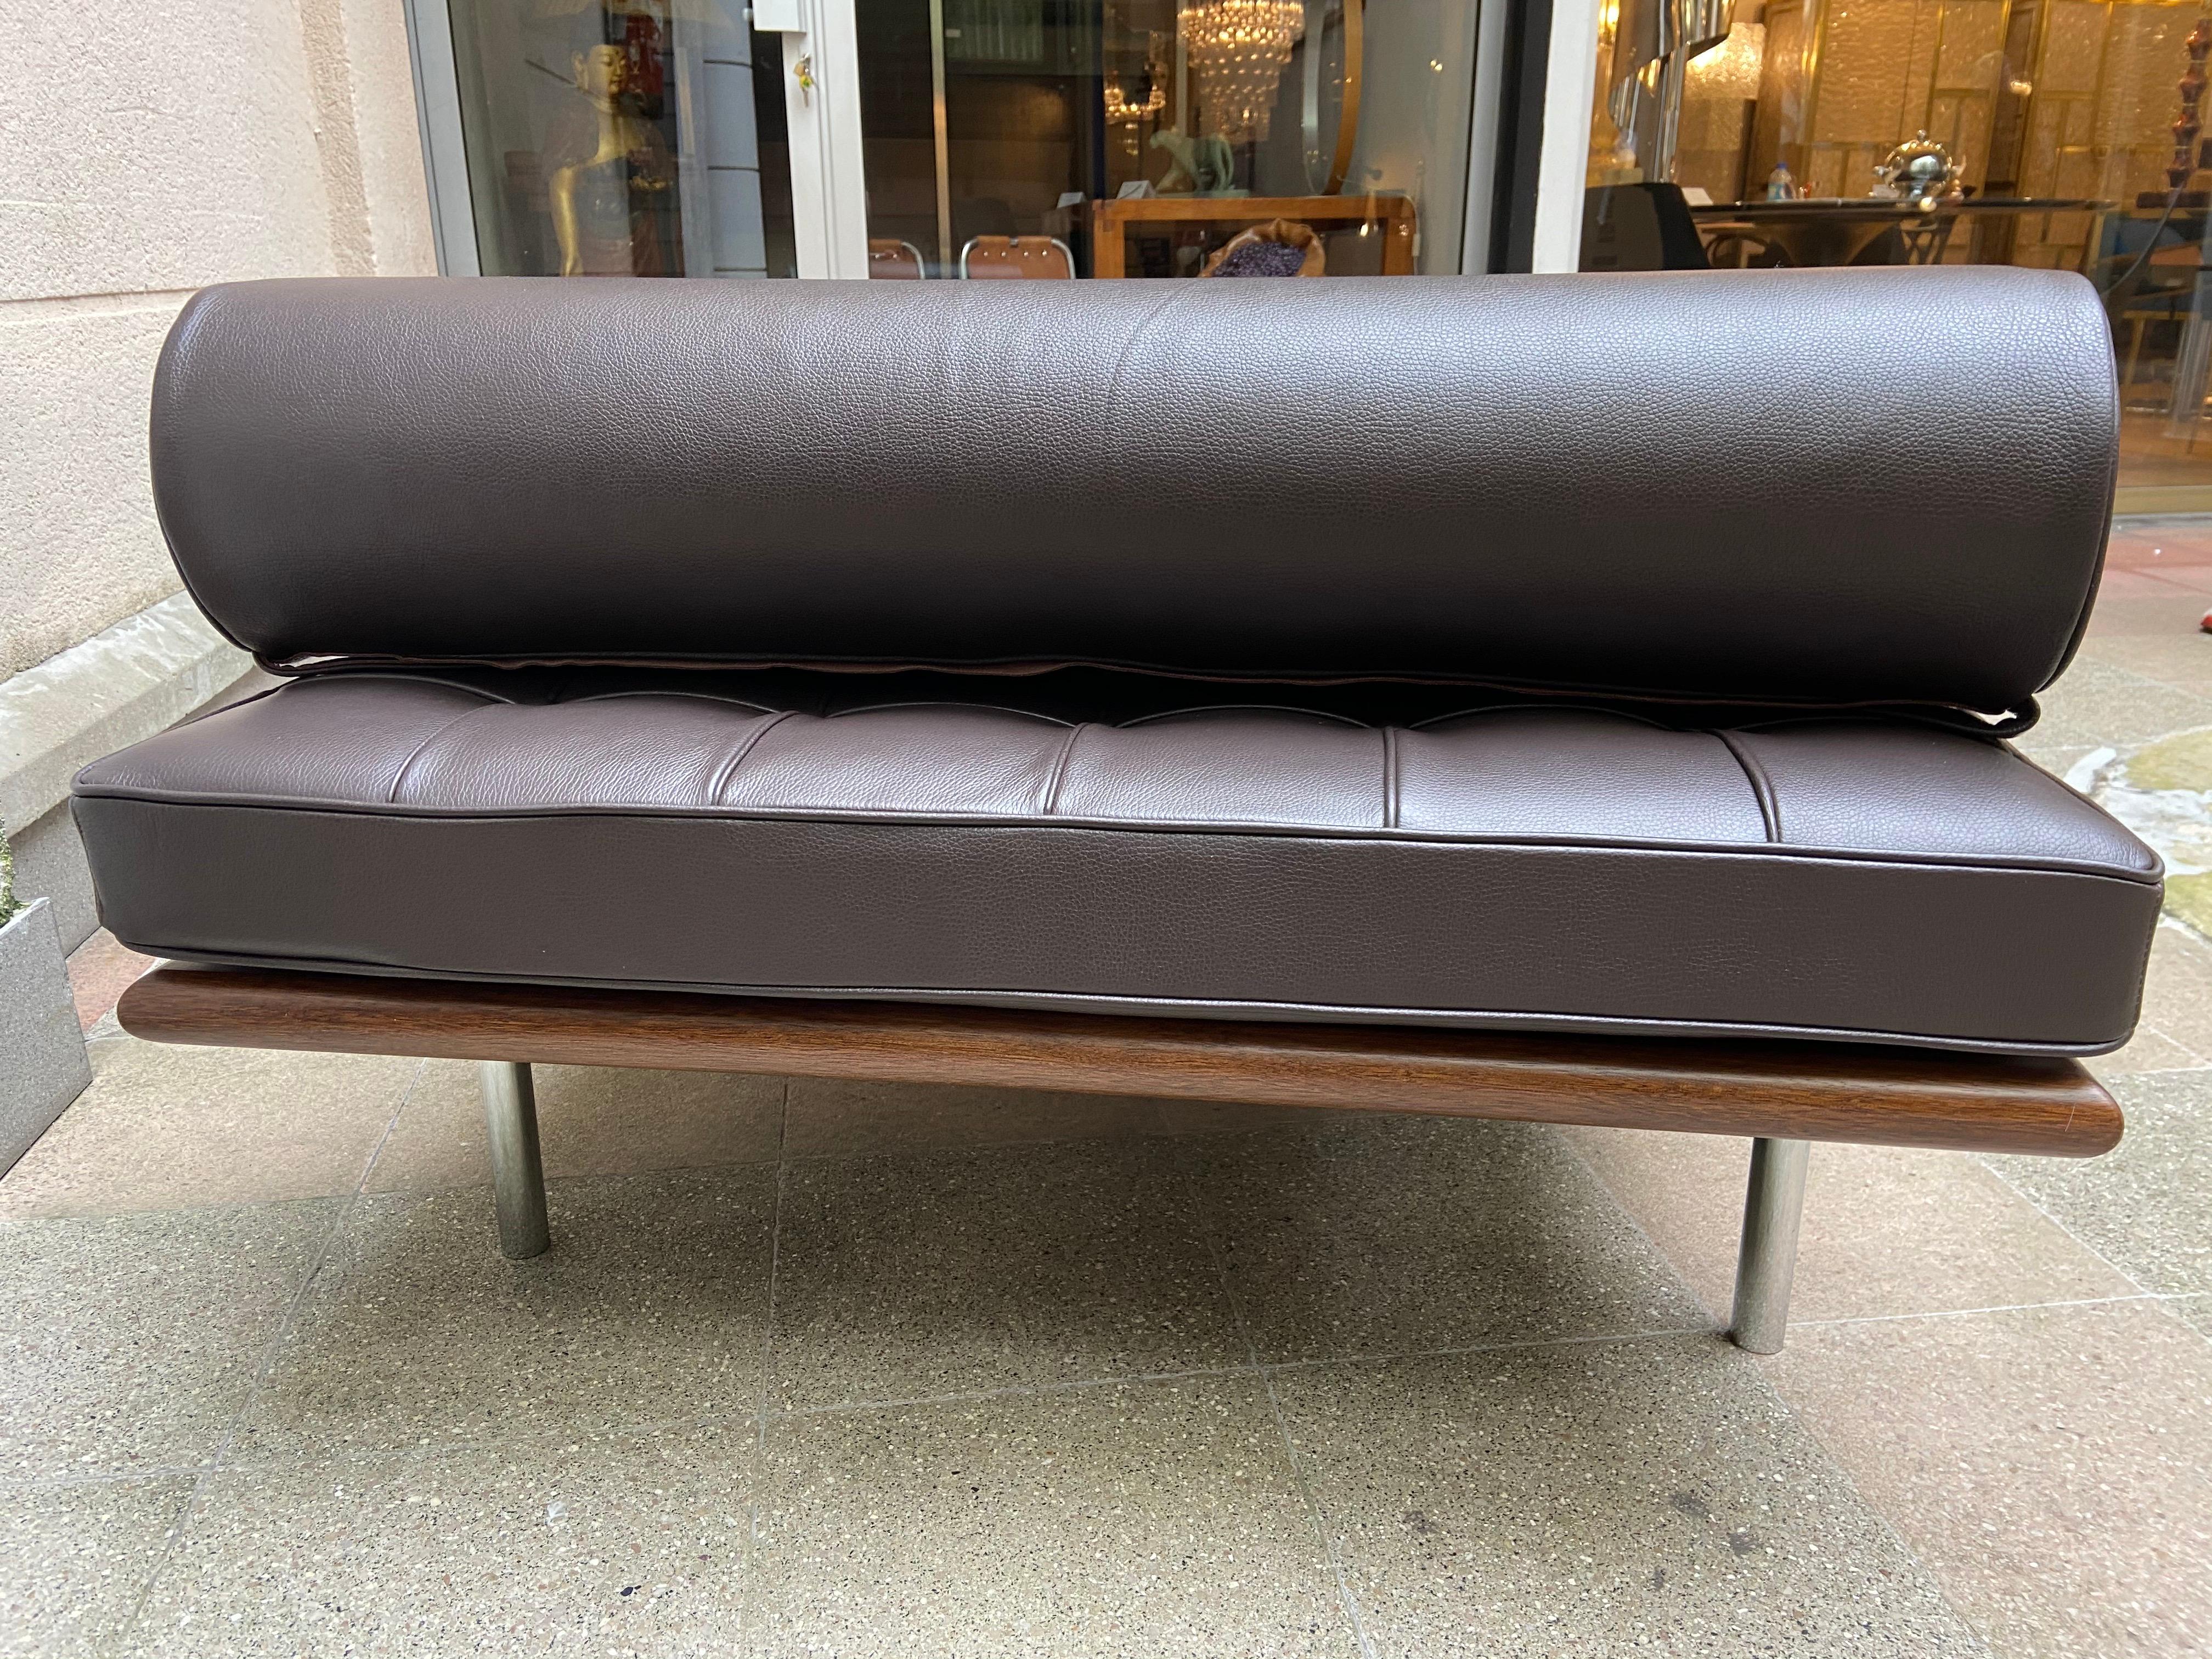 European Mies van der Rohe - Barcelona daybed brown leather - 2017 